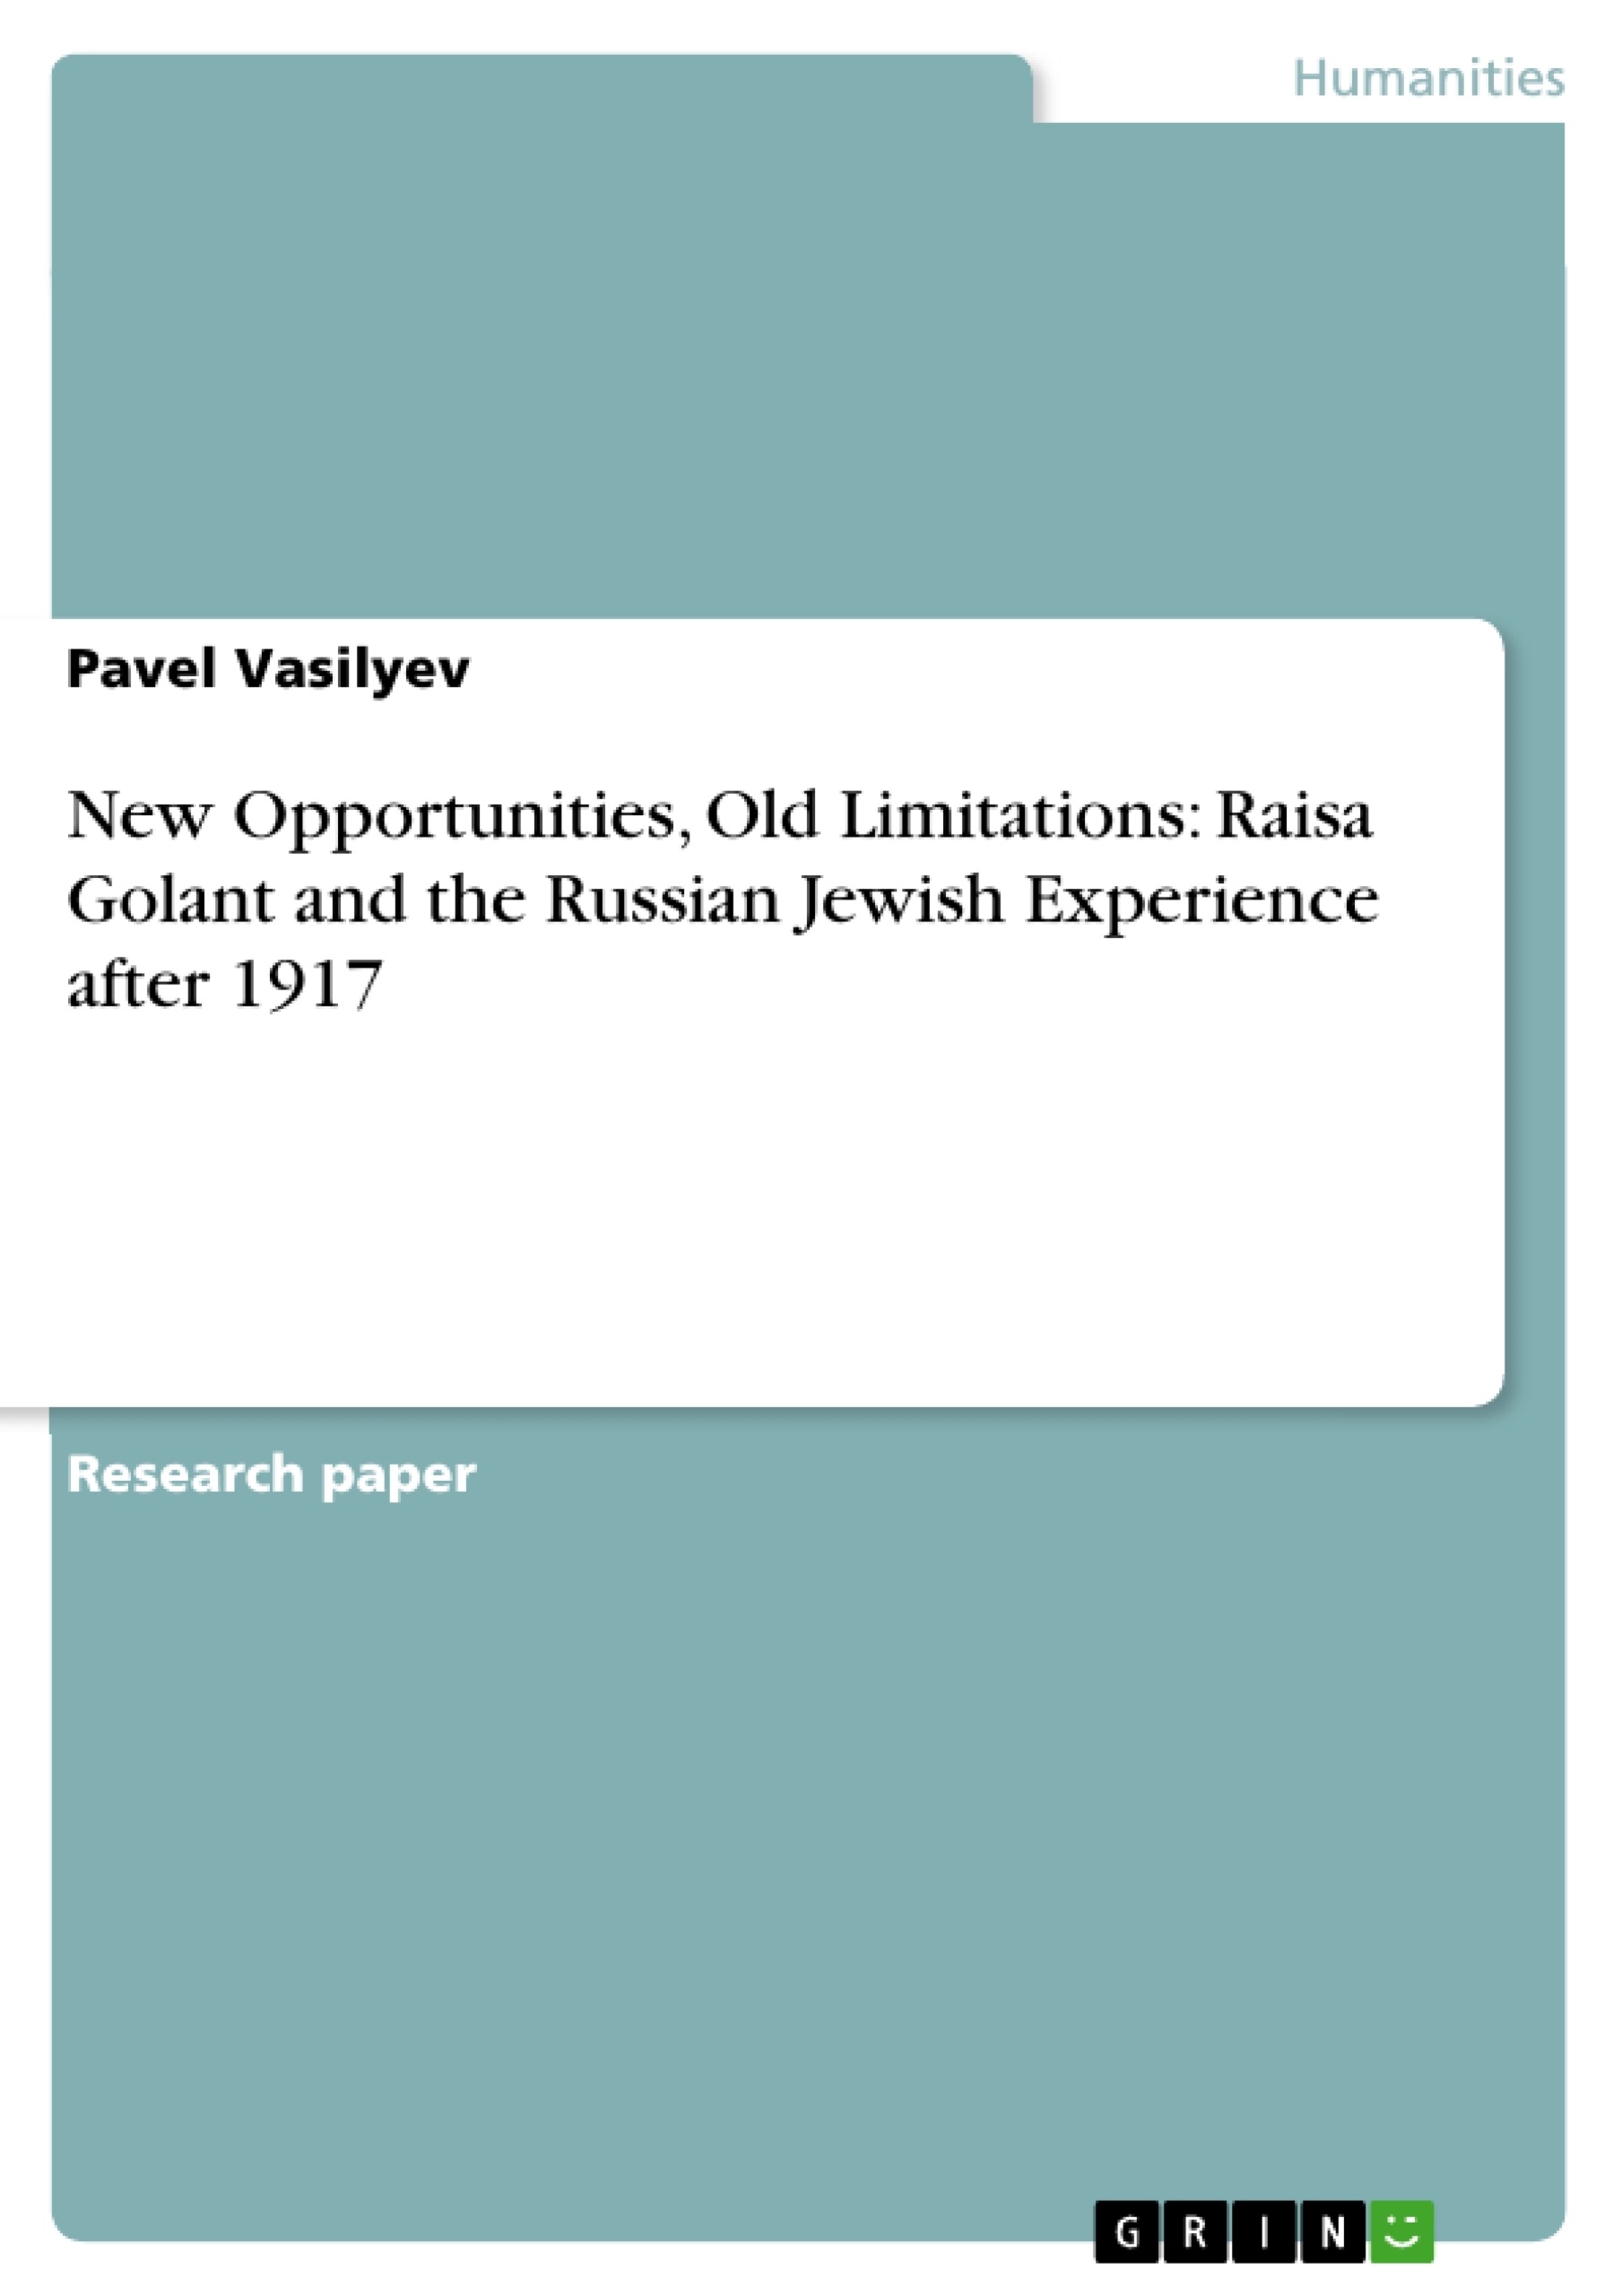 Titre: New Opportunities, Old Limitations: Raisa Golant and the Russian Jewish Experience after 1917